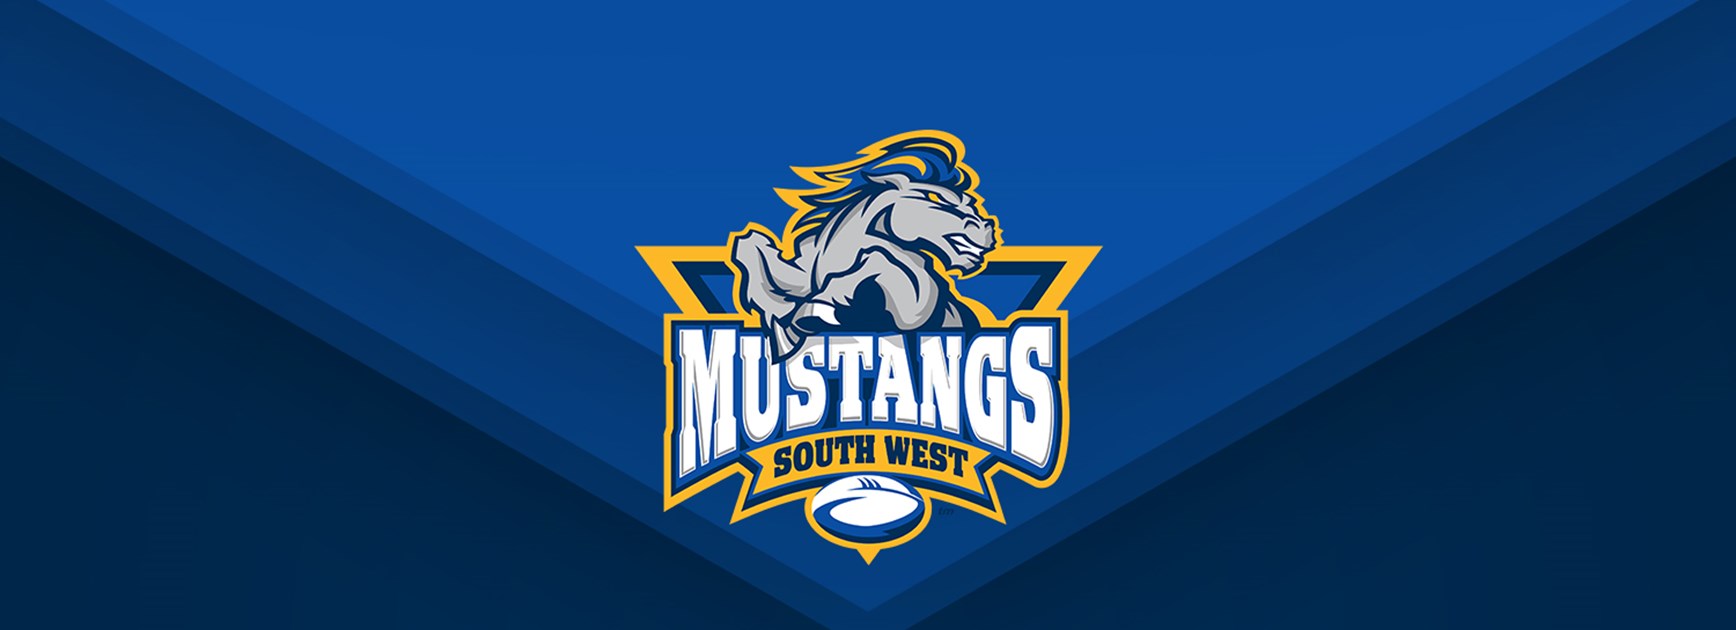 Apply for South West Mustangs junior positions